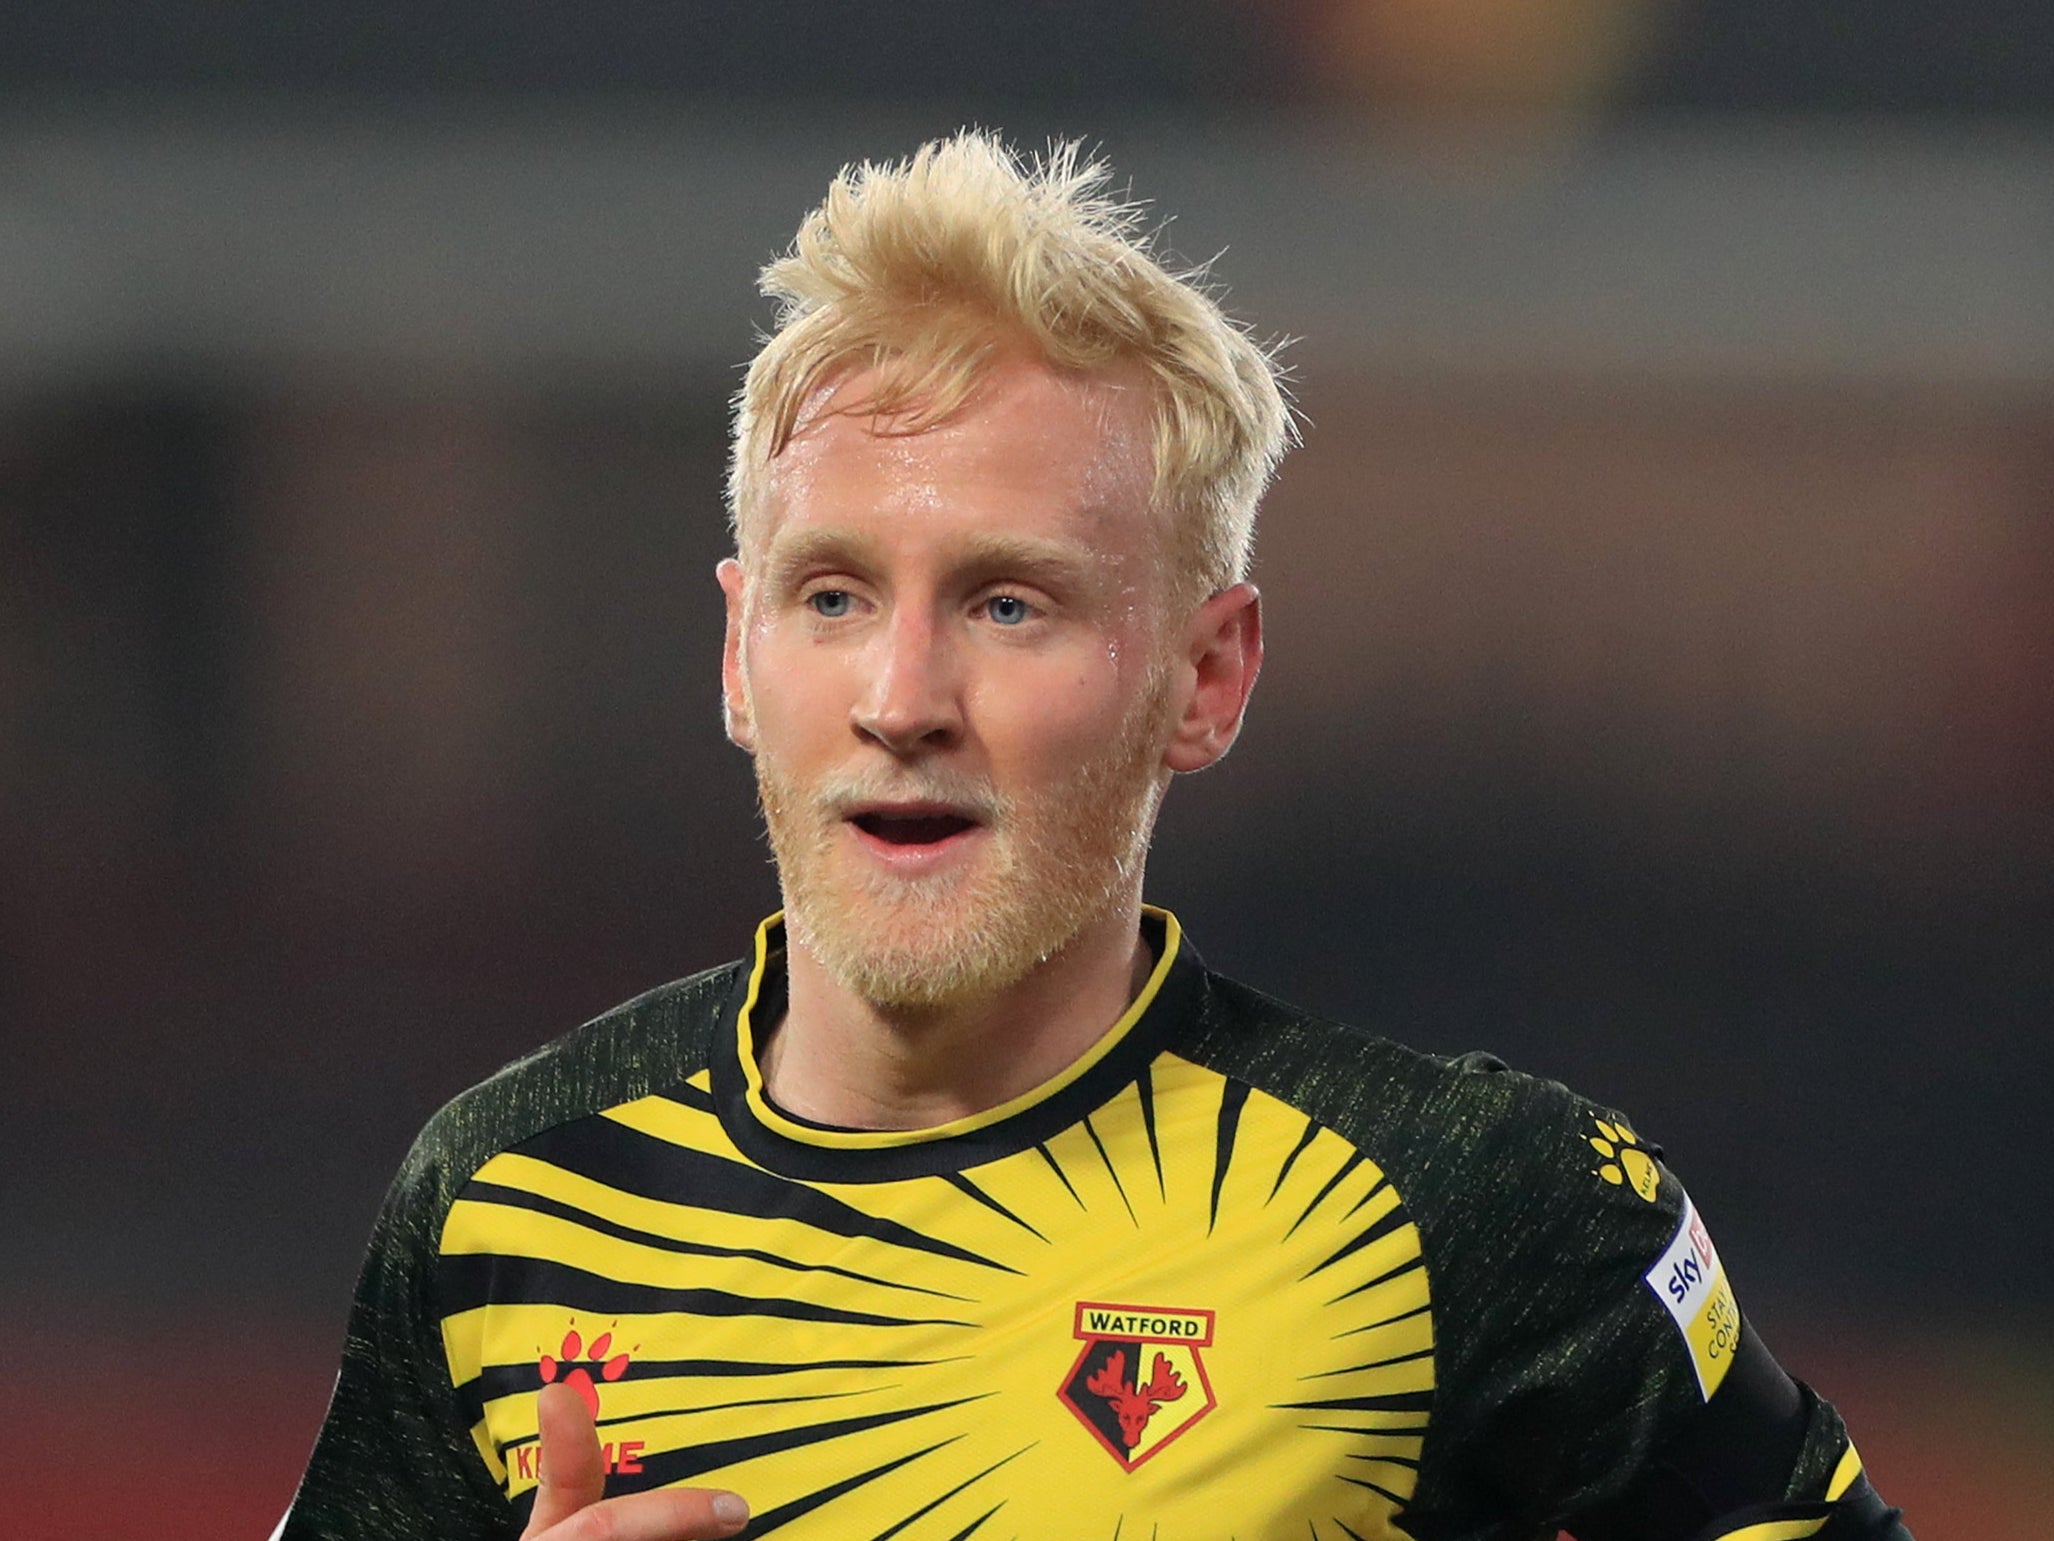 Watford’s Will Hughes is joining Crystal Palace